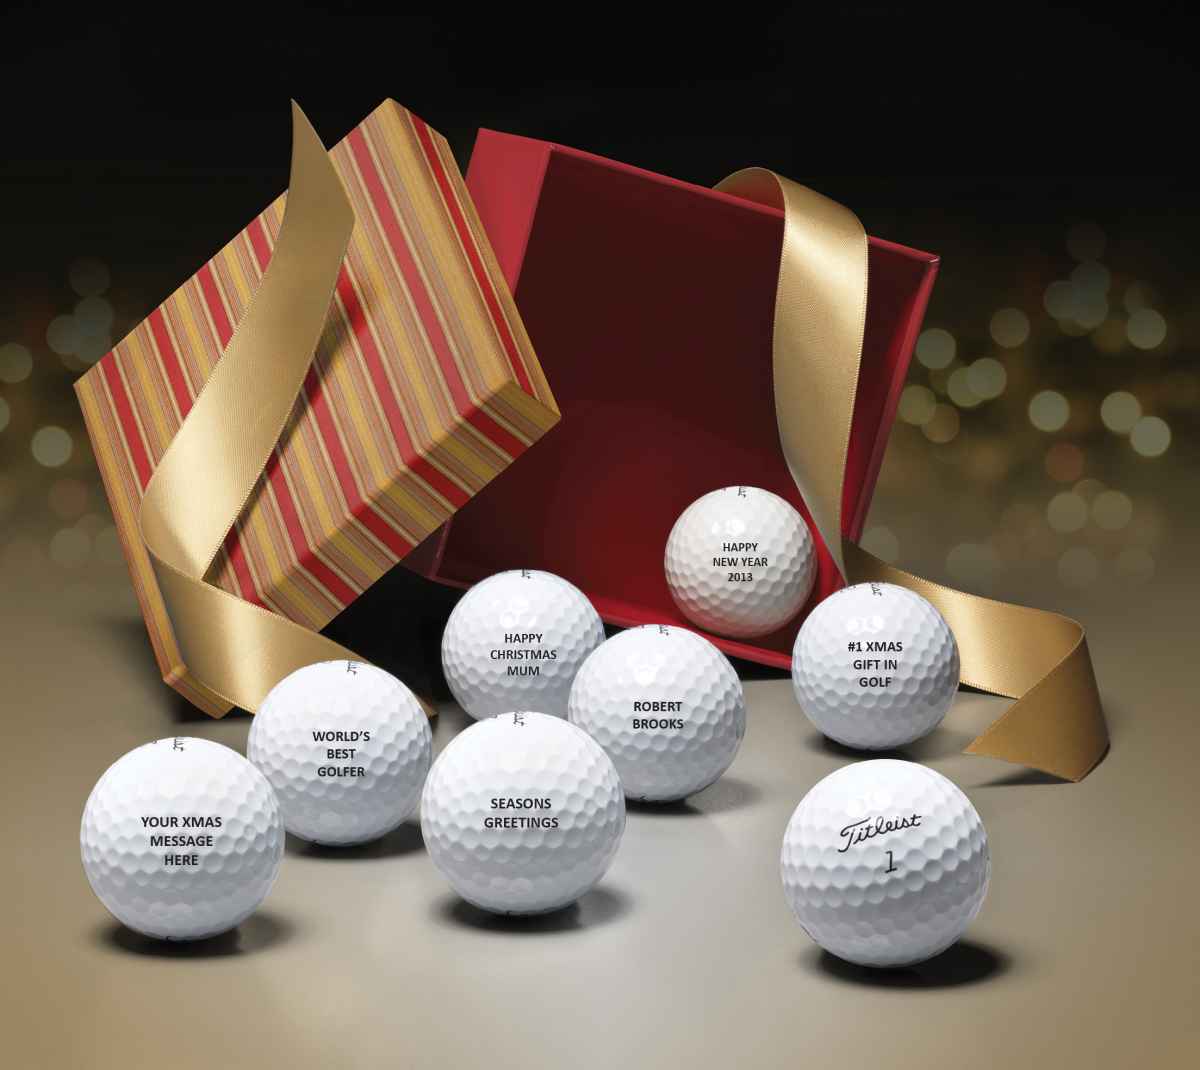 Free ball personalisation from Titleist